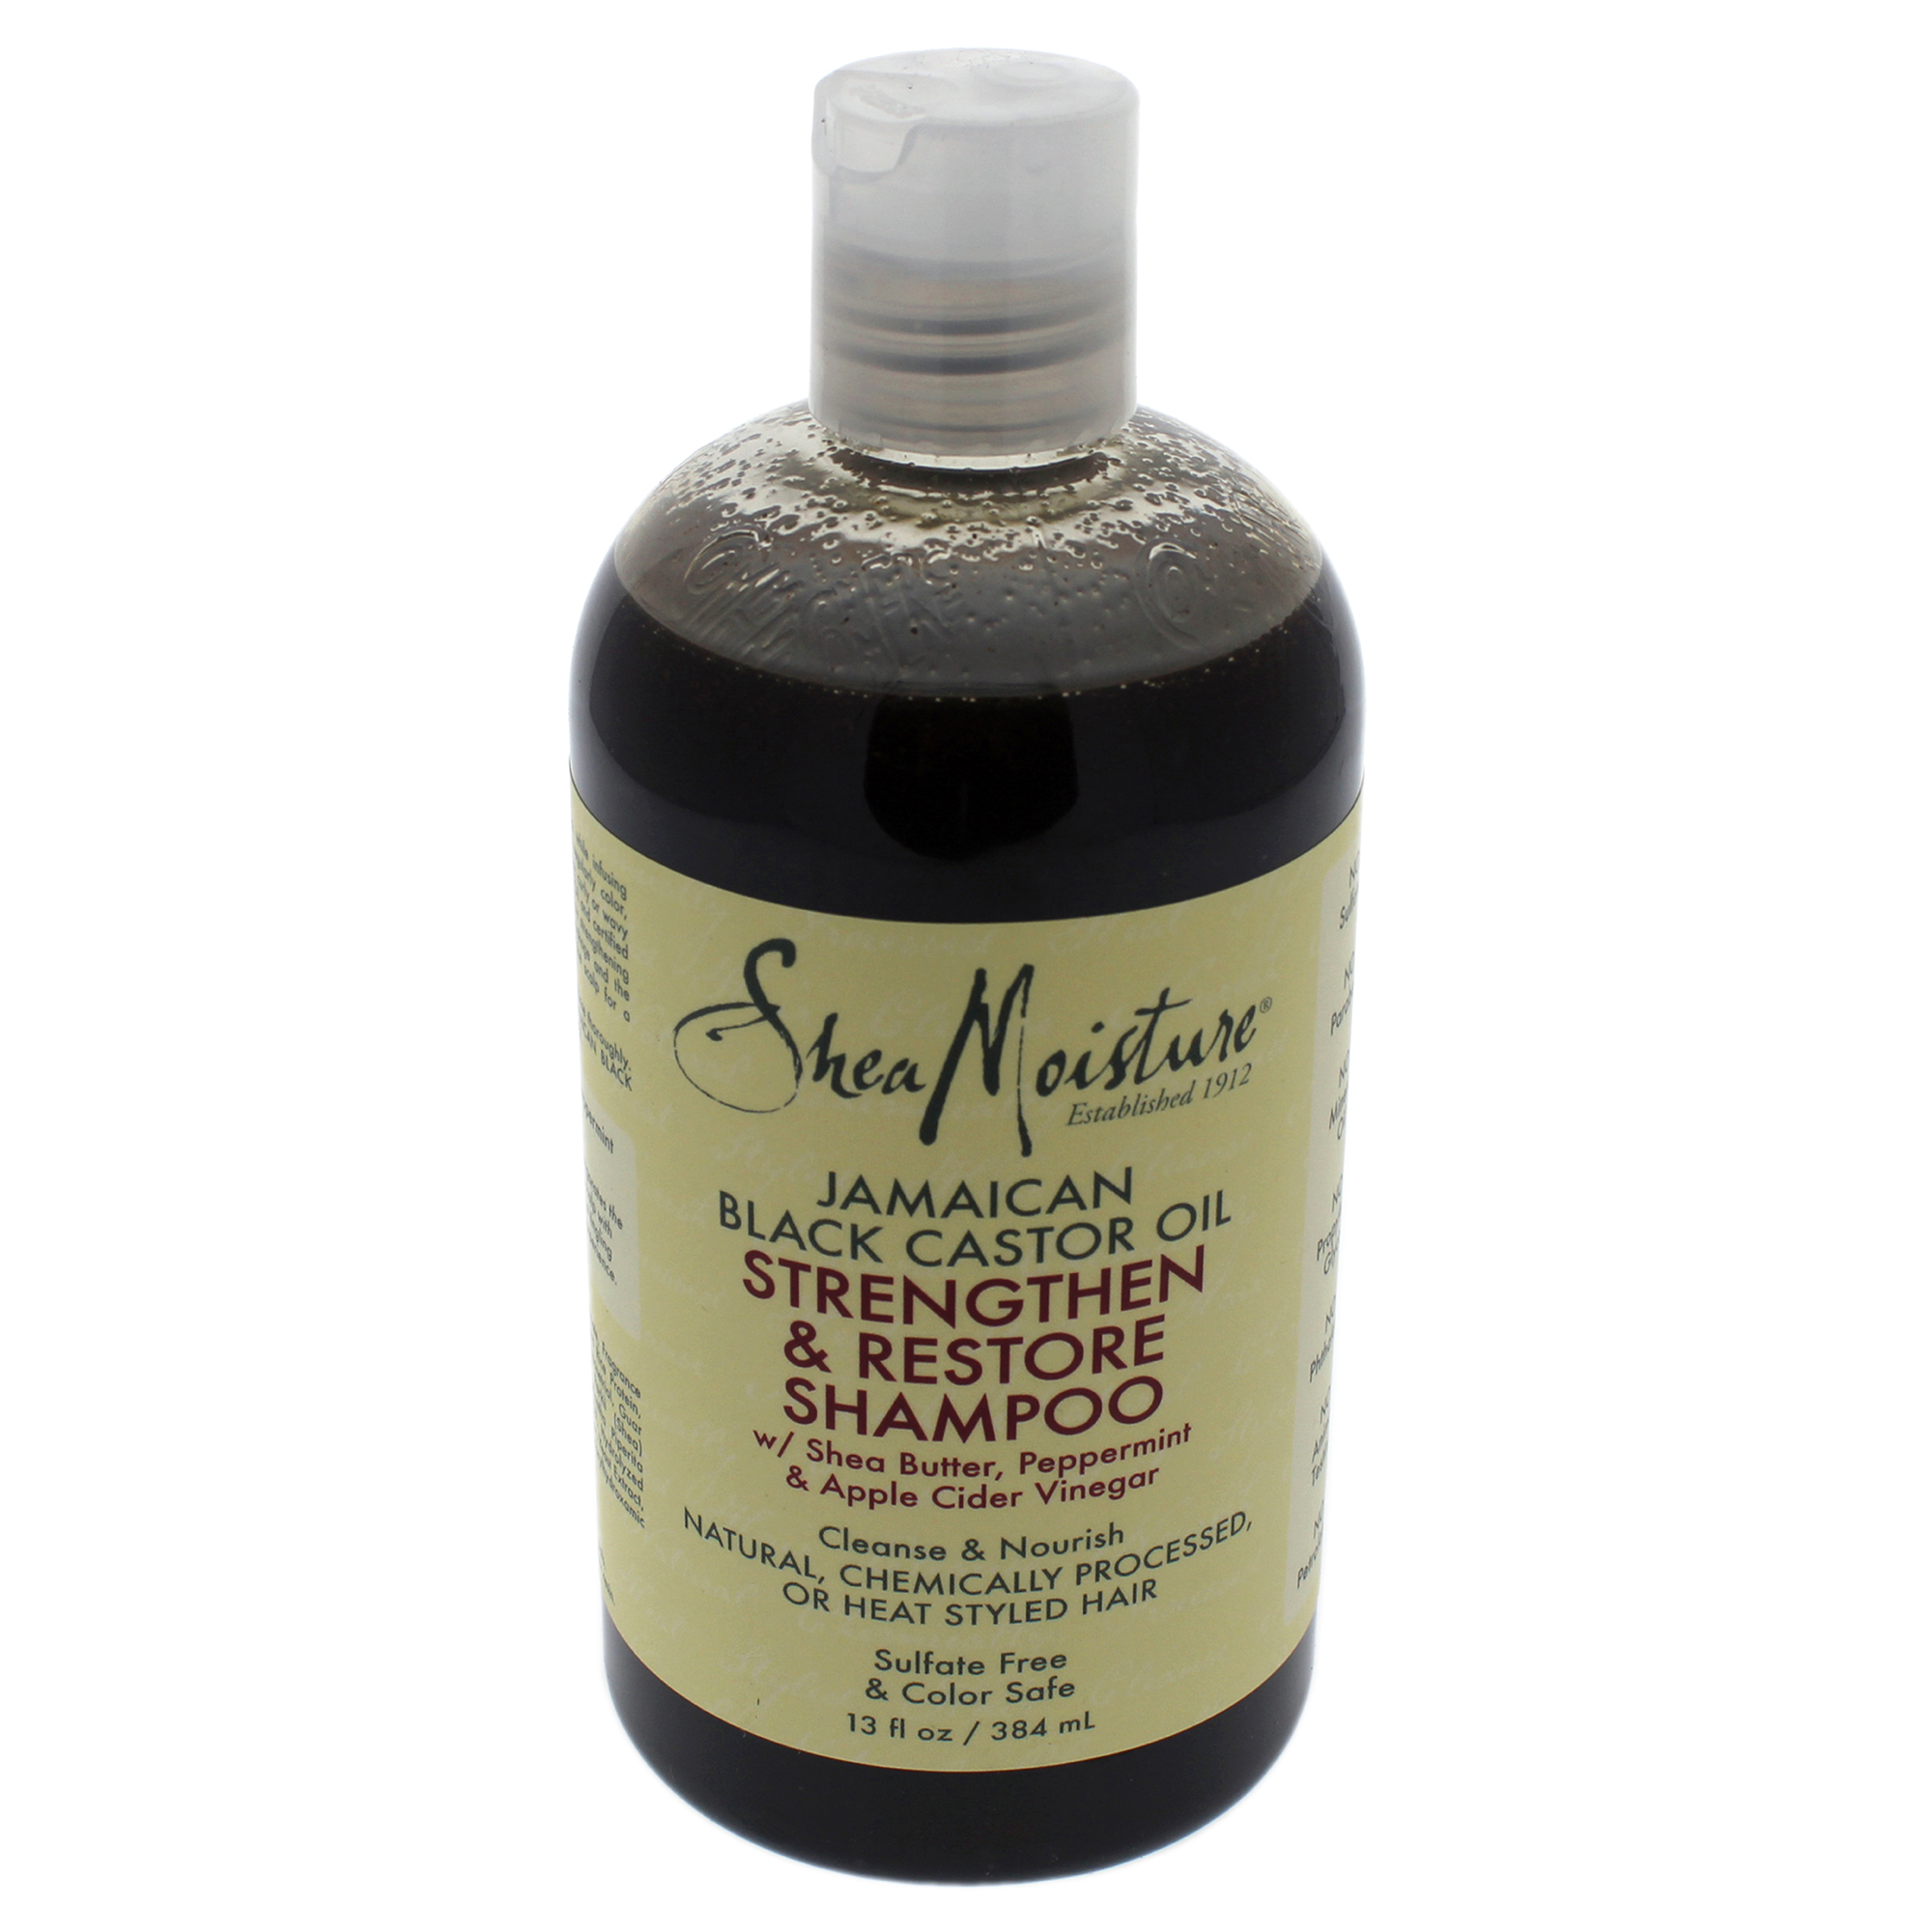 Jamaican Black Castor Oil Strengthen, Grow And Restore Shampoo by for Unisex - 13 oz Shampoo - Pack of 2 - image 5 of 5